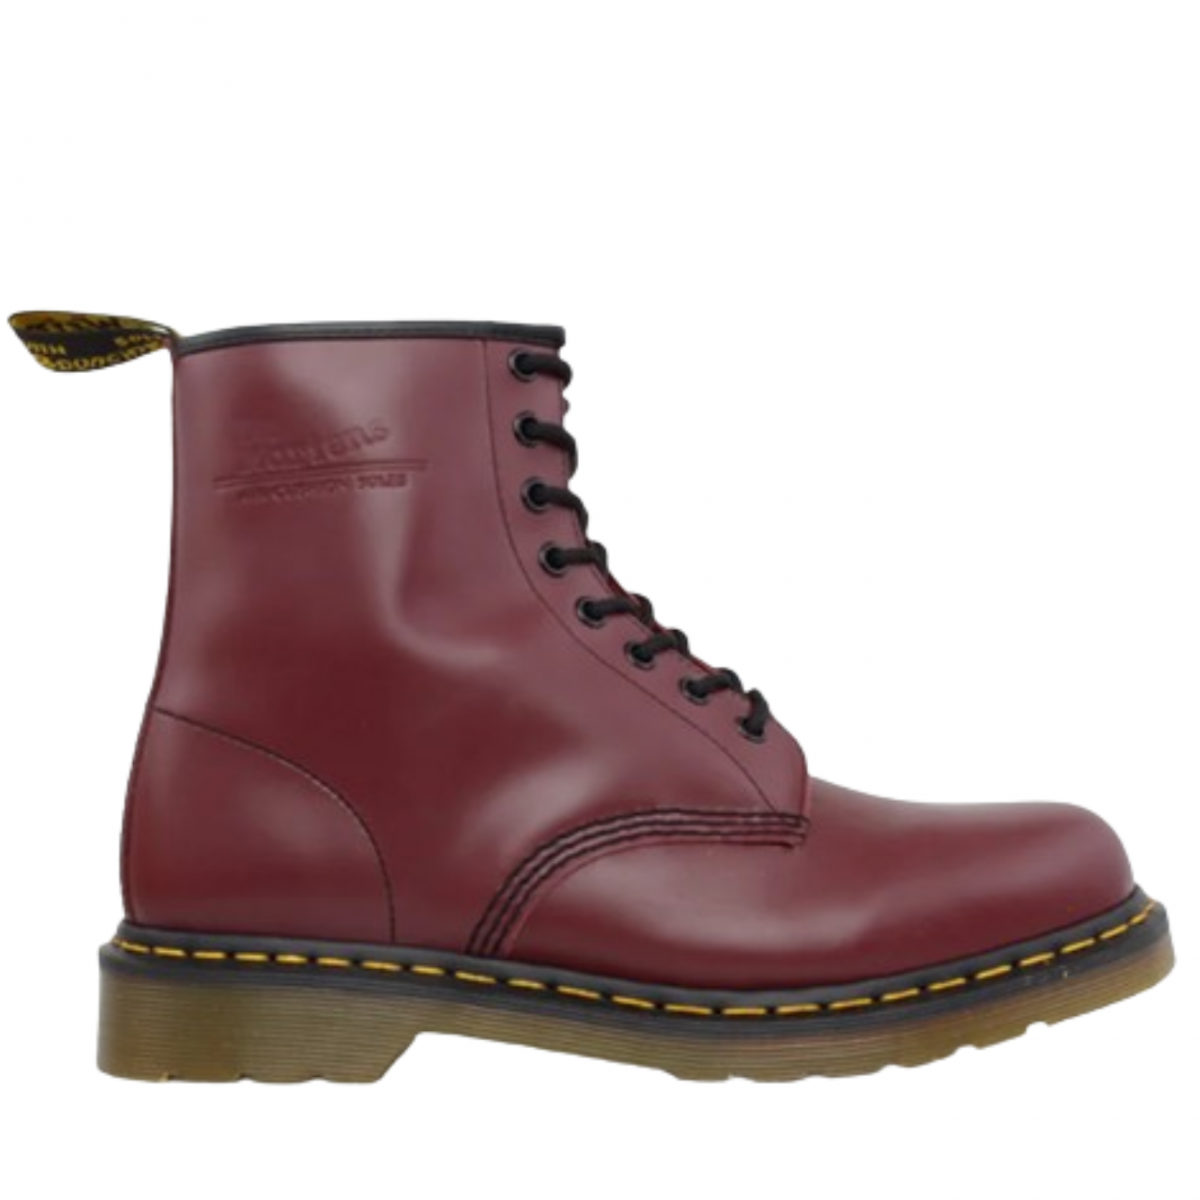 Cherry Red 1460 Boots